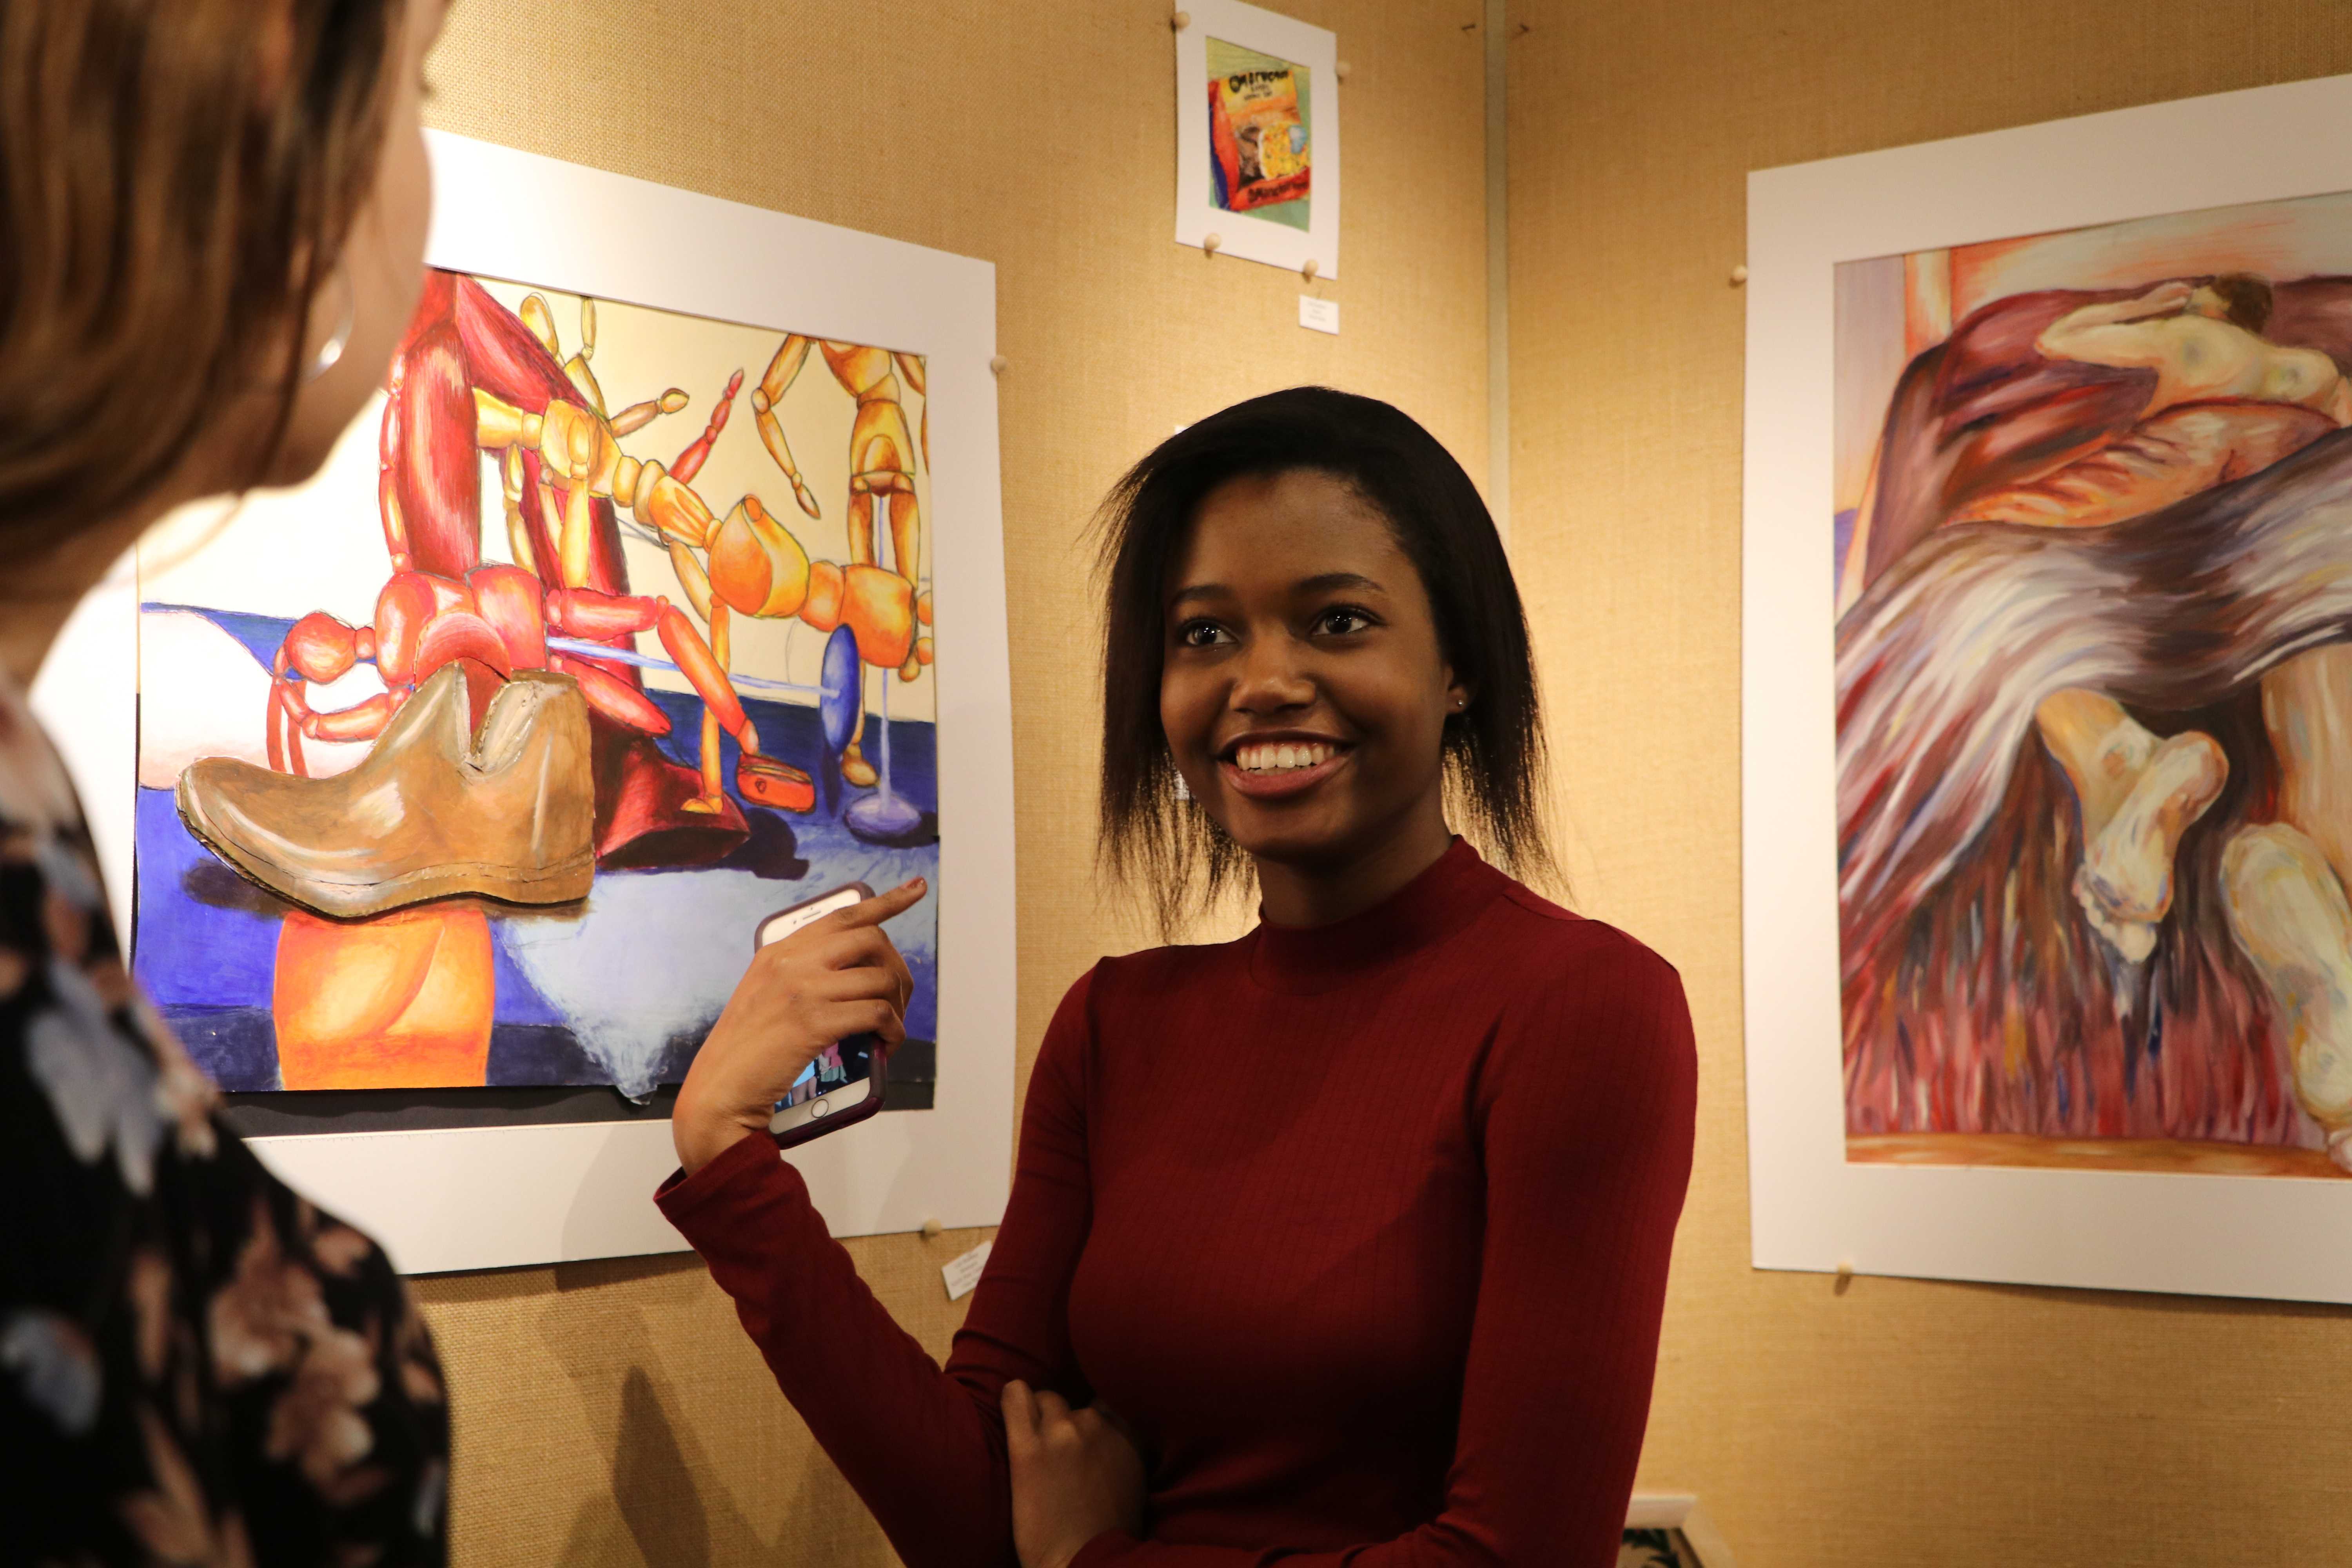 Laurie Jonhatan (12, J&C) cheerfully discusses the artwork with her friend, Olivia Dawson (12, J&C). Photo by Grace Bradley. 